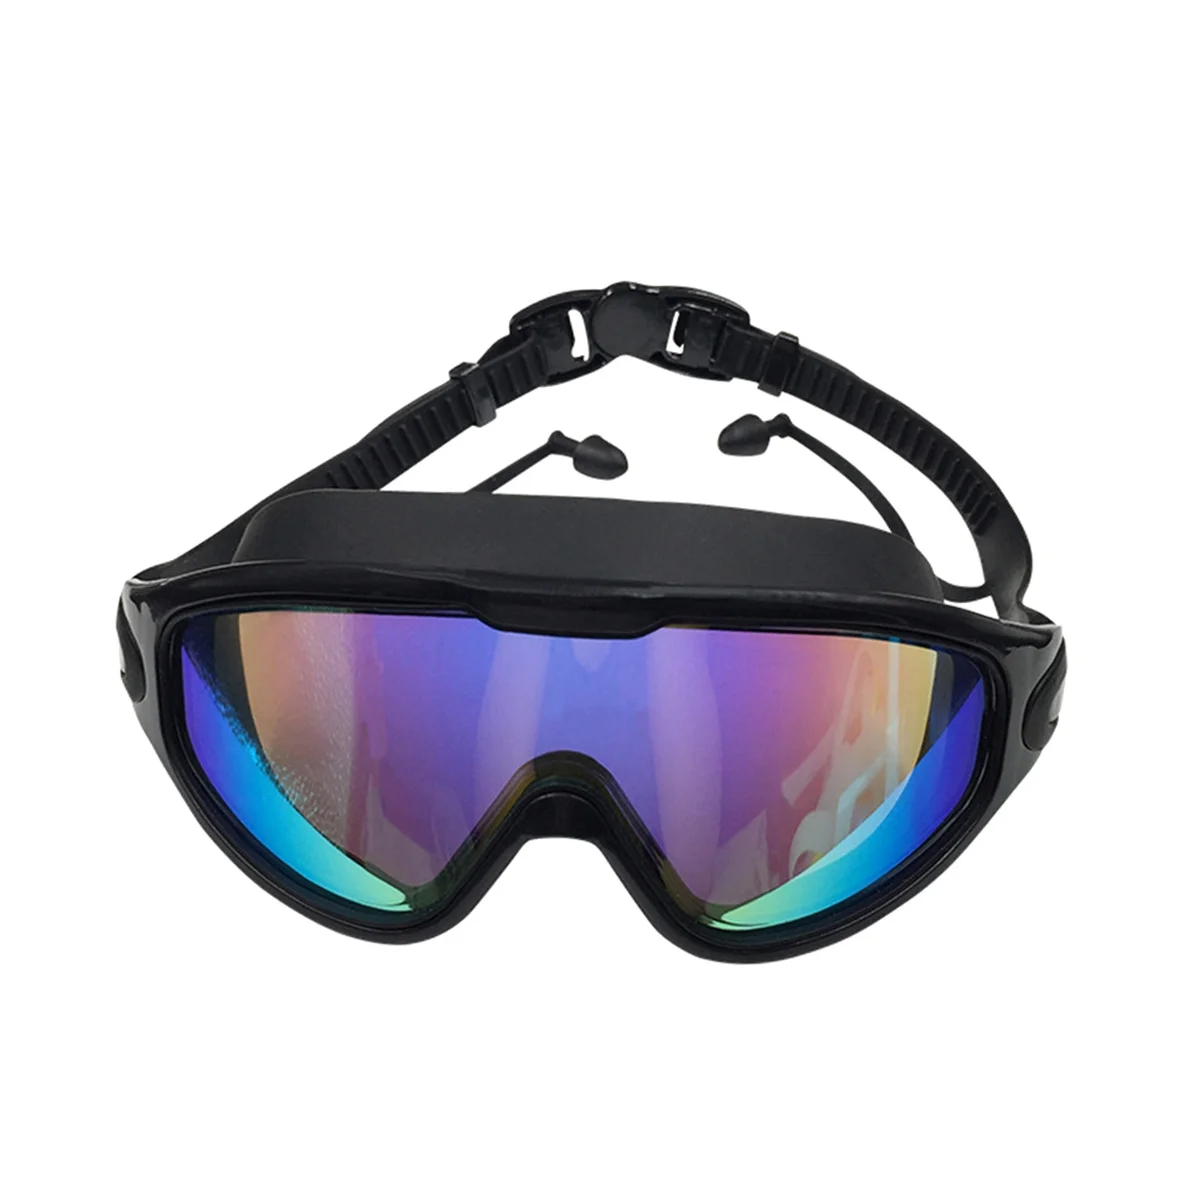 

Swim Goggles Anti-Fog UV Protection No Leaking Wide View Pool Goggles for Adult Men Women Youth Teen over 15 Black